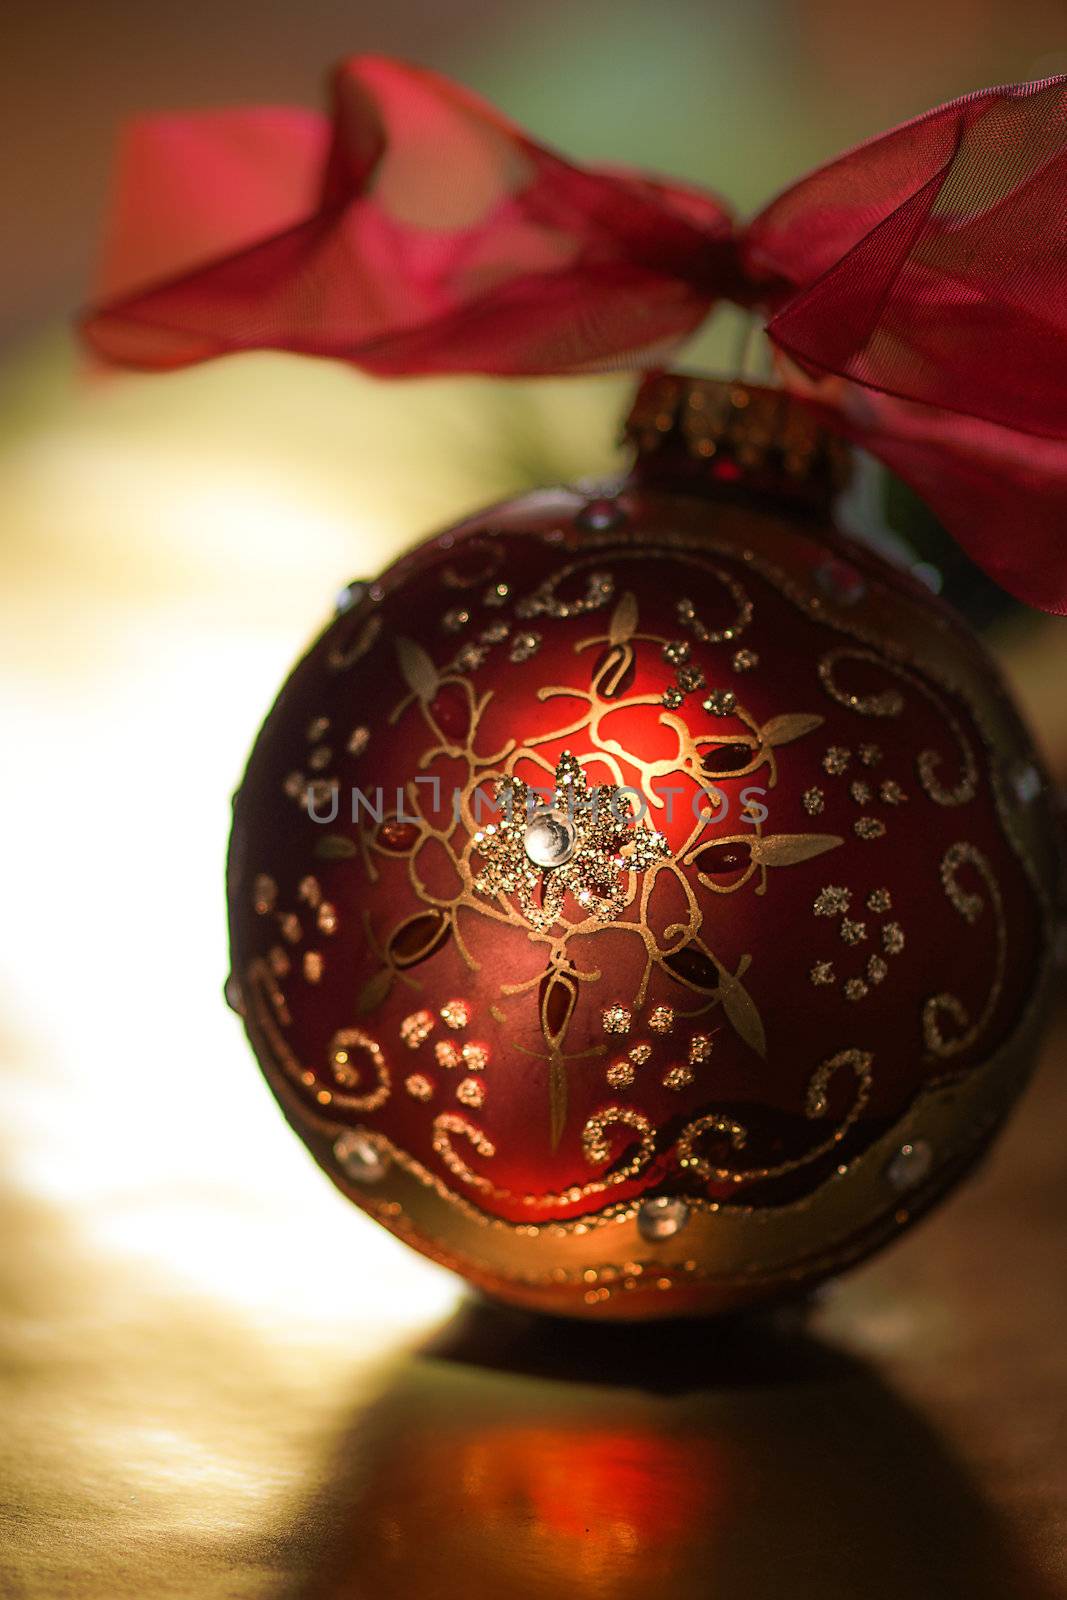 Red Ornament Holiday Background